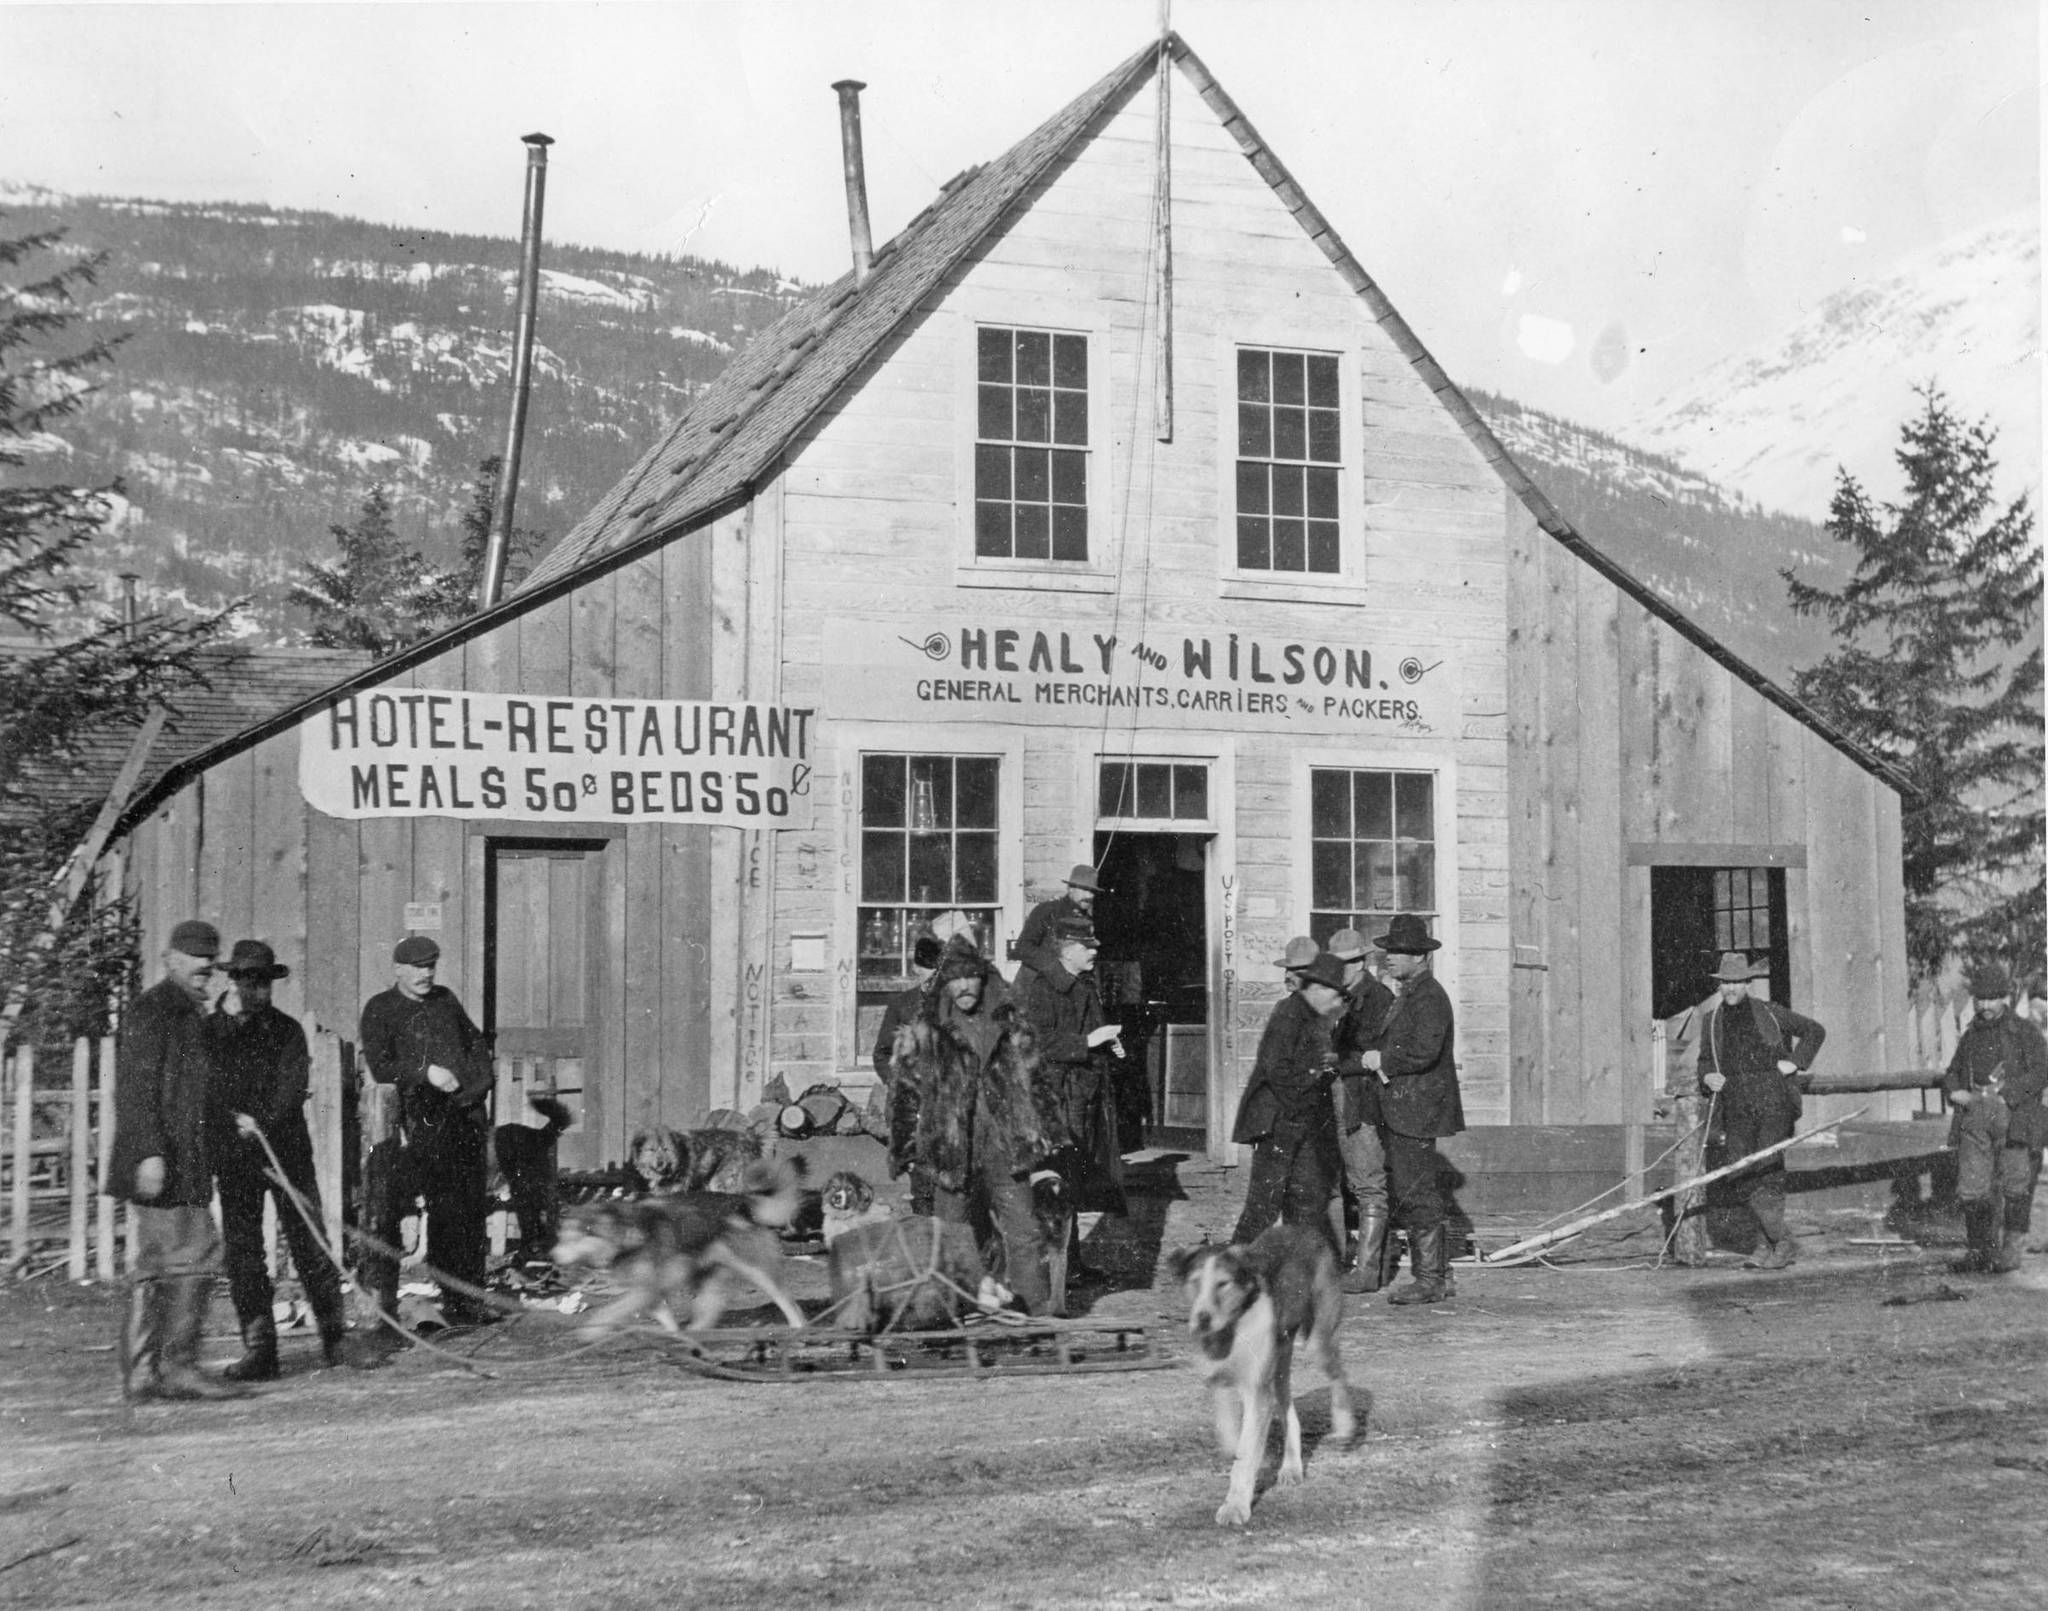 Healy & Wilson’s Trading Post in 1898. (National Archives, Collection of Brig. Gen. David L. Brainard, 200(S)-BR-1-A-10C; KLGO HW-10-1082)